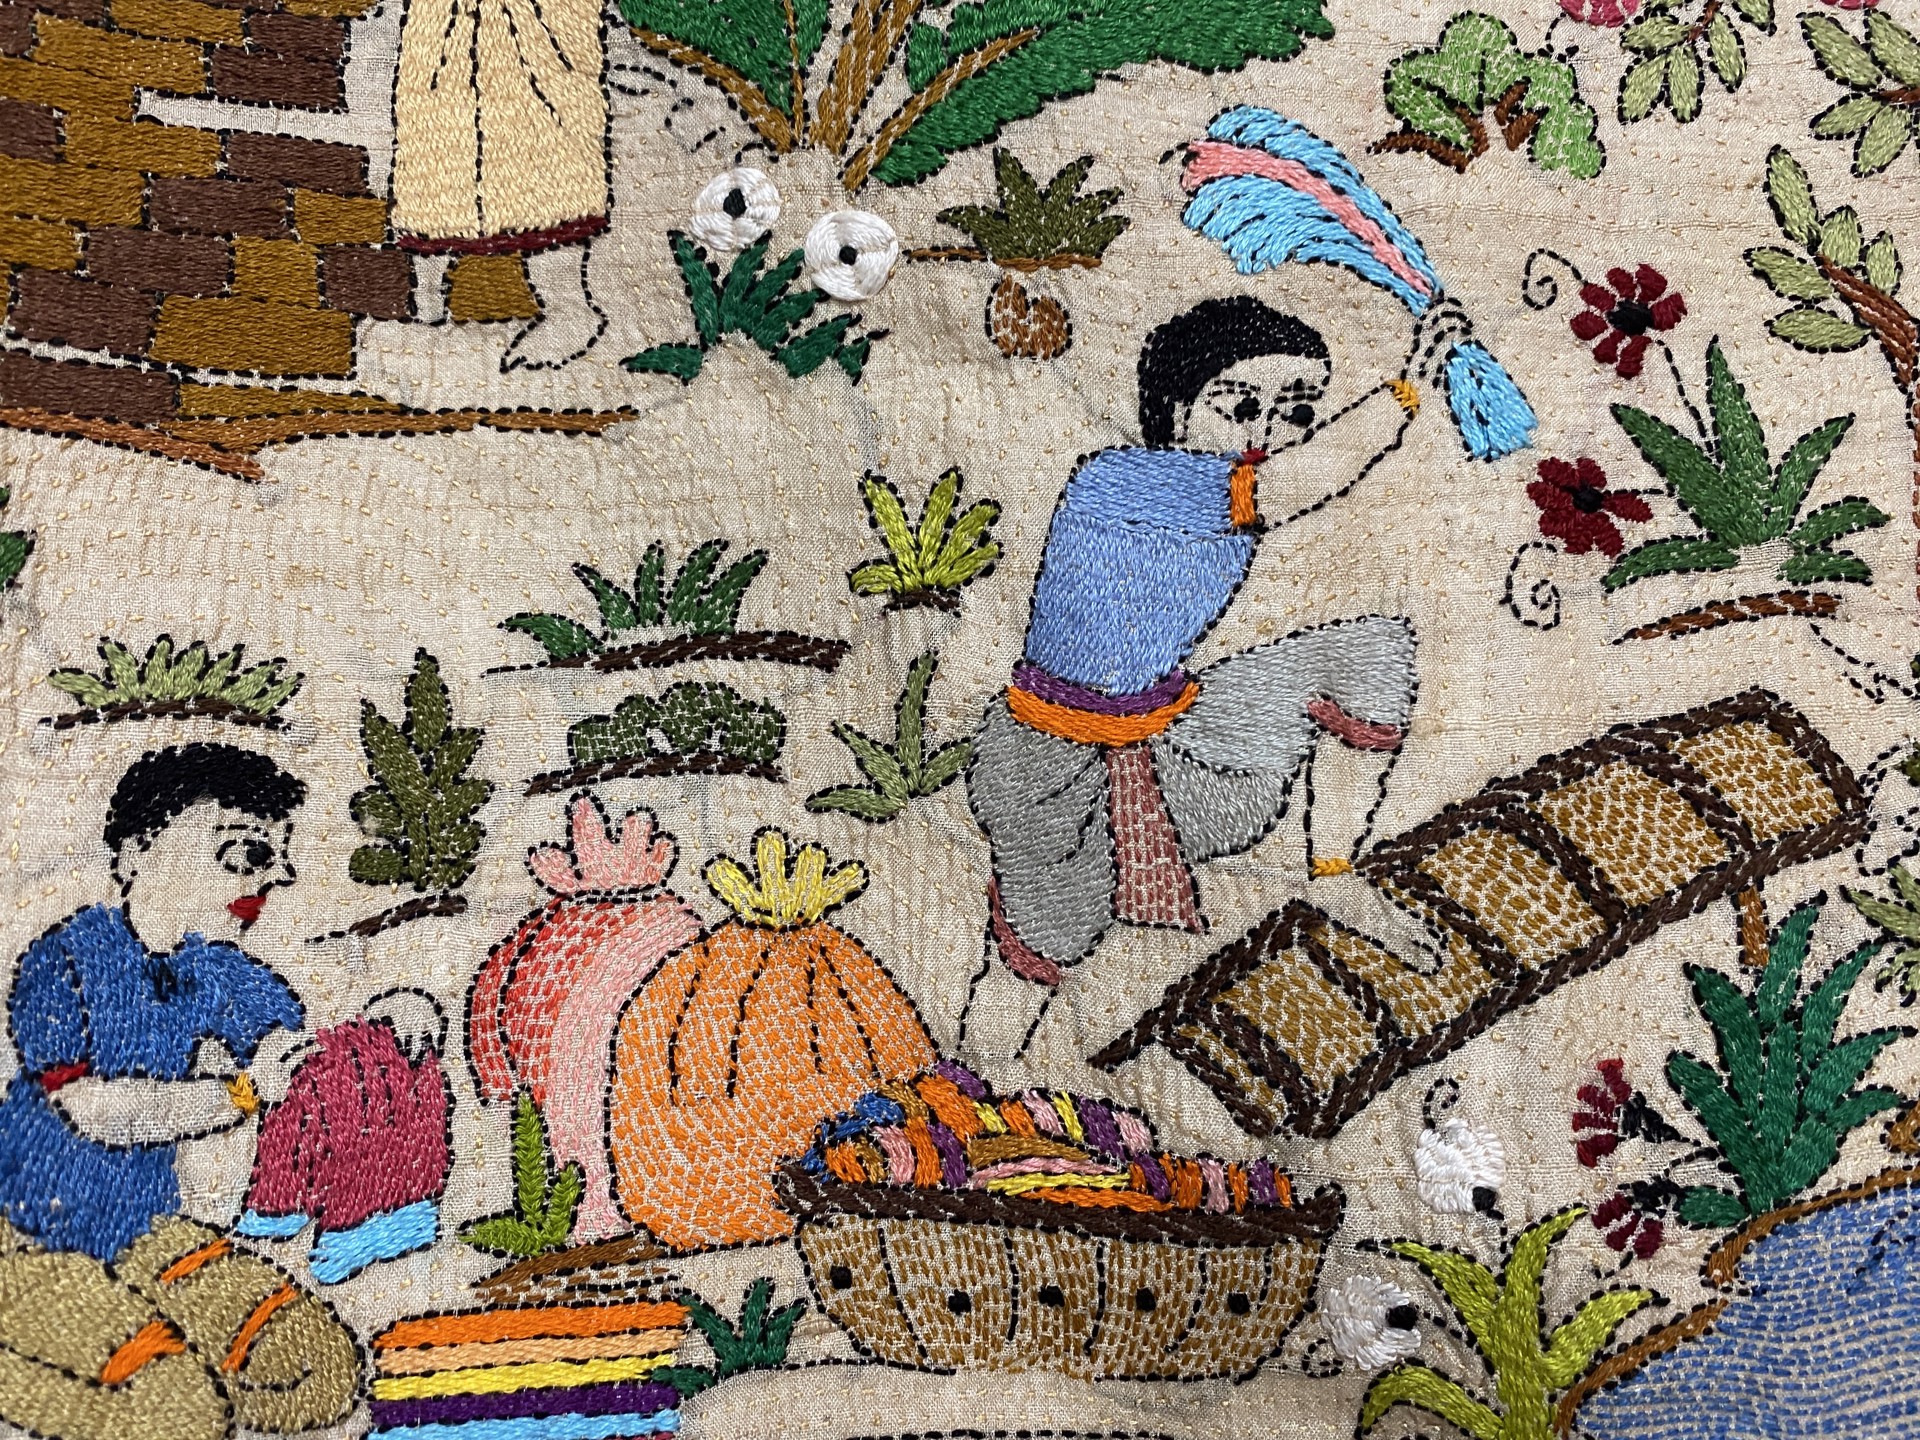 Life in Village by She Kantha